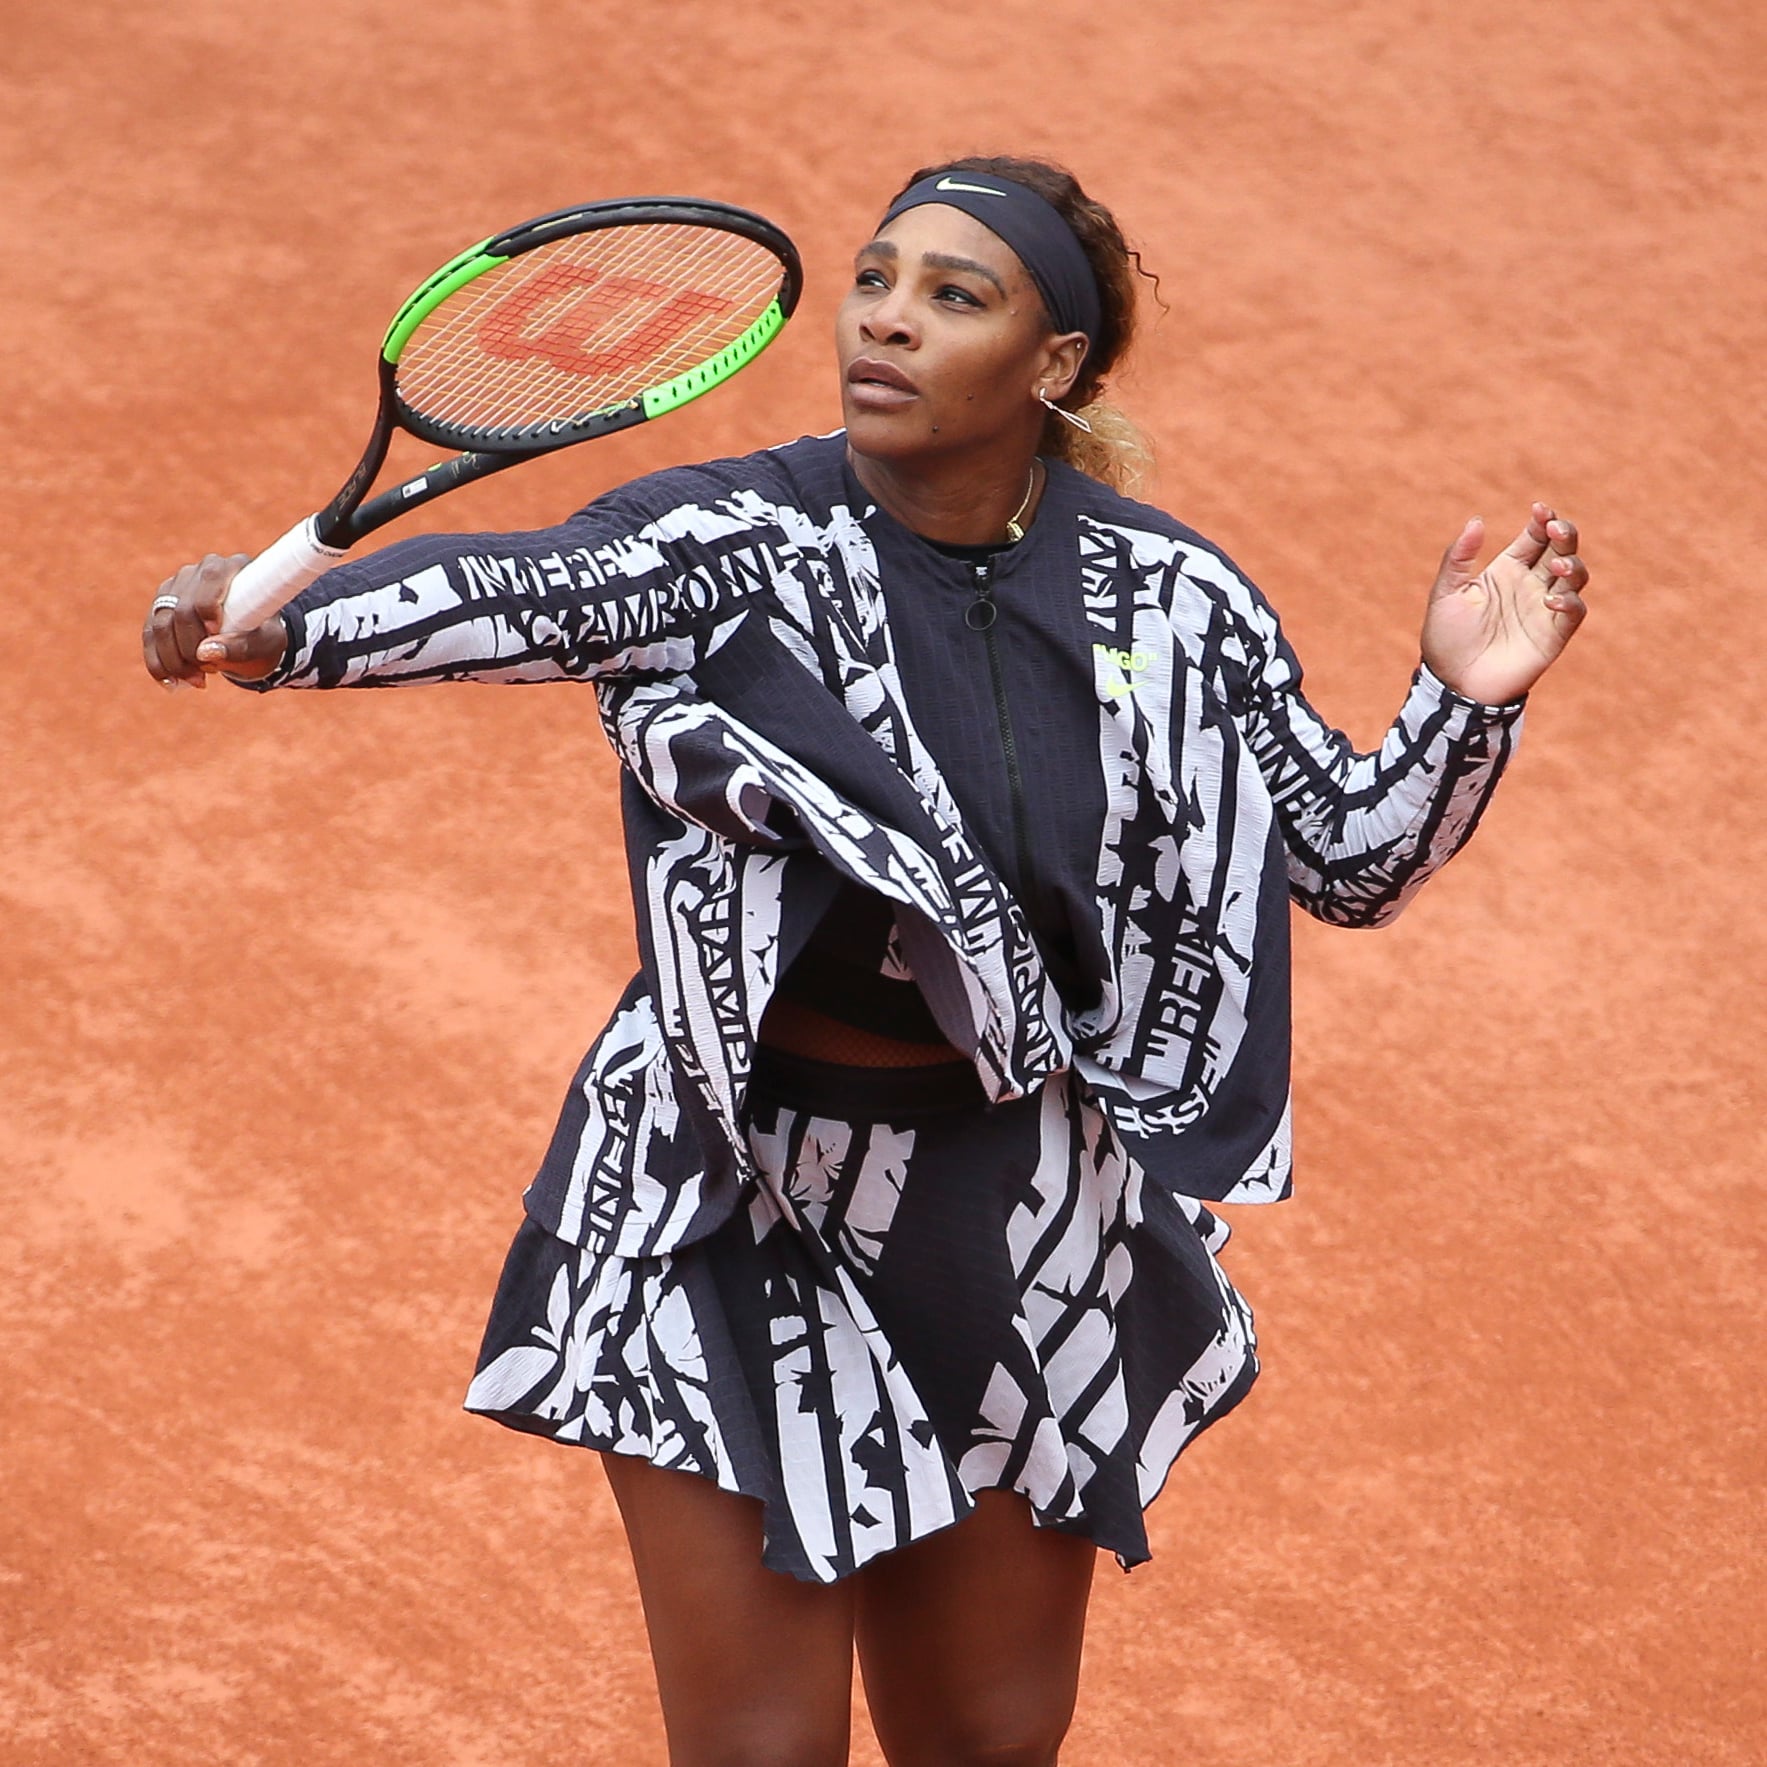 White Outfit With Text 2019 French Open | POPSUGAR Fashion